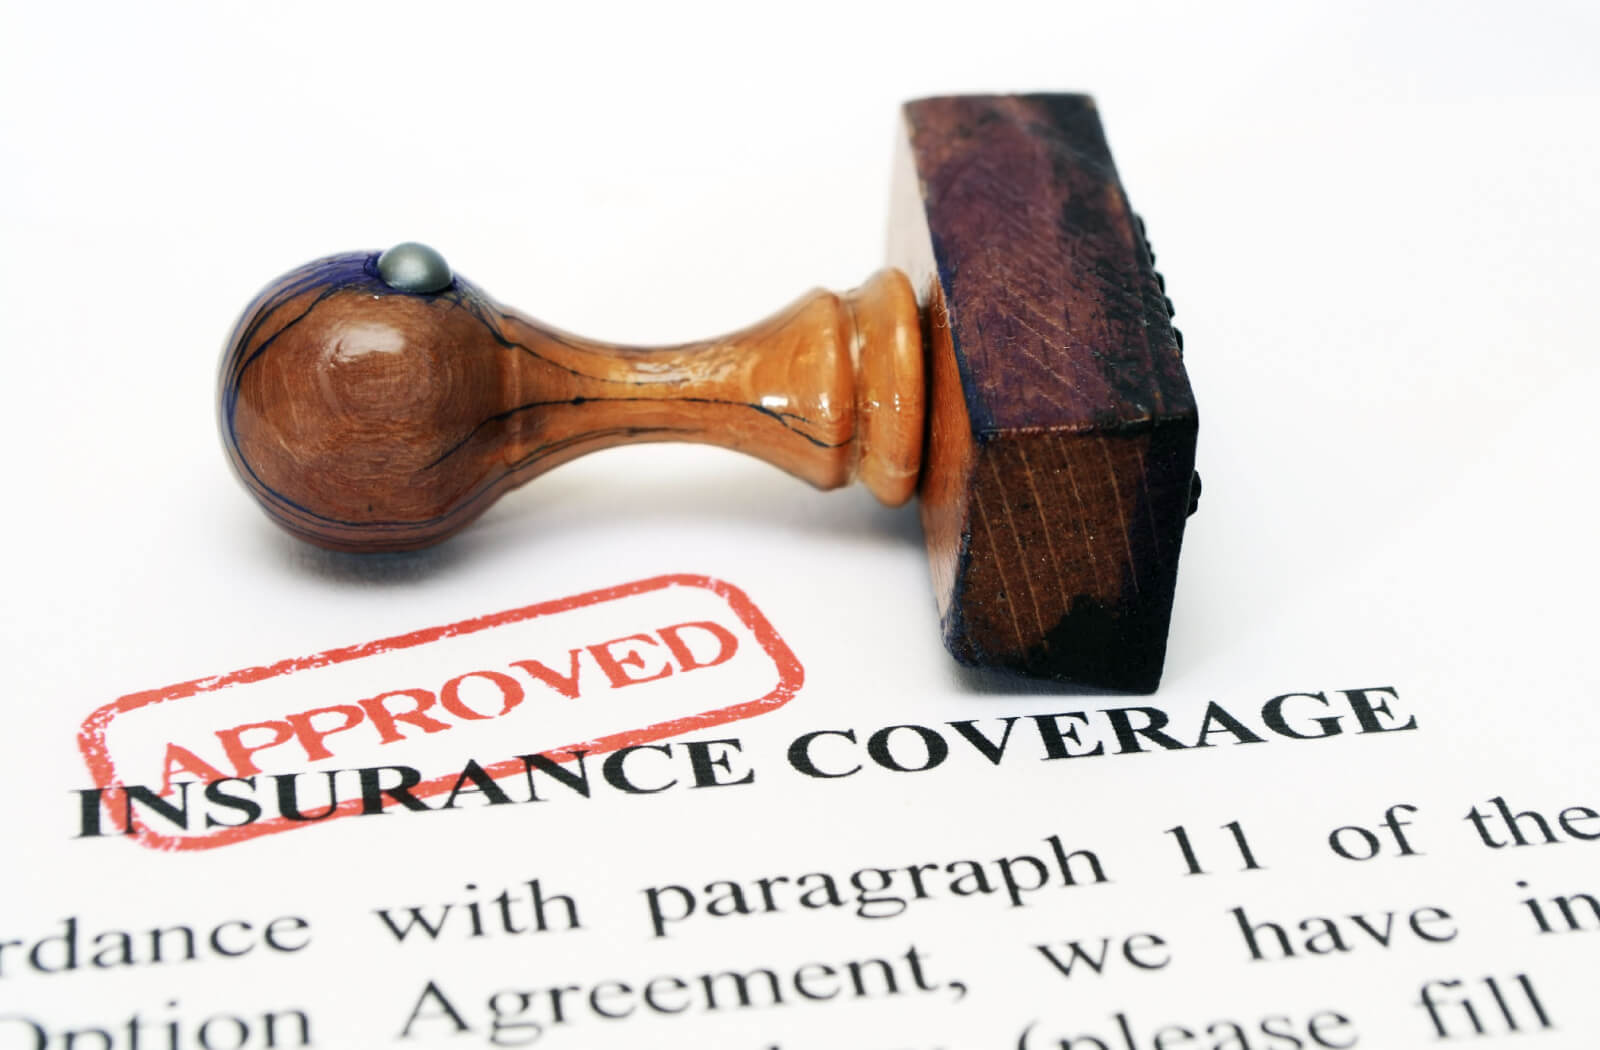 An insurance policy with an approved mark and rubber stamp.